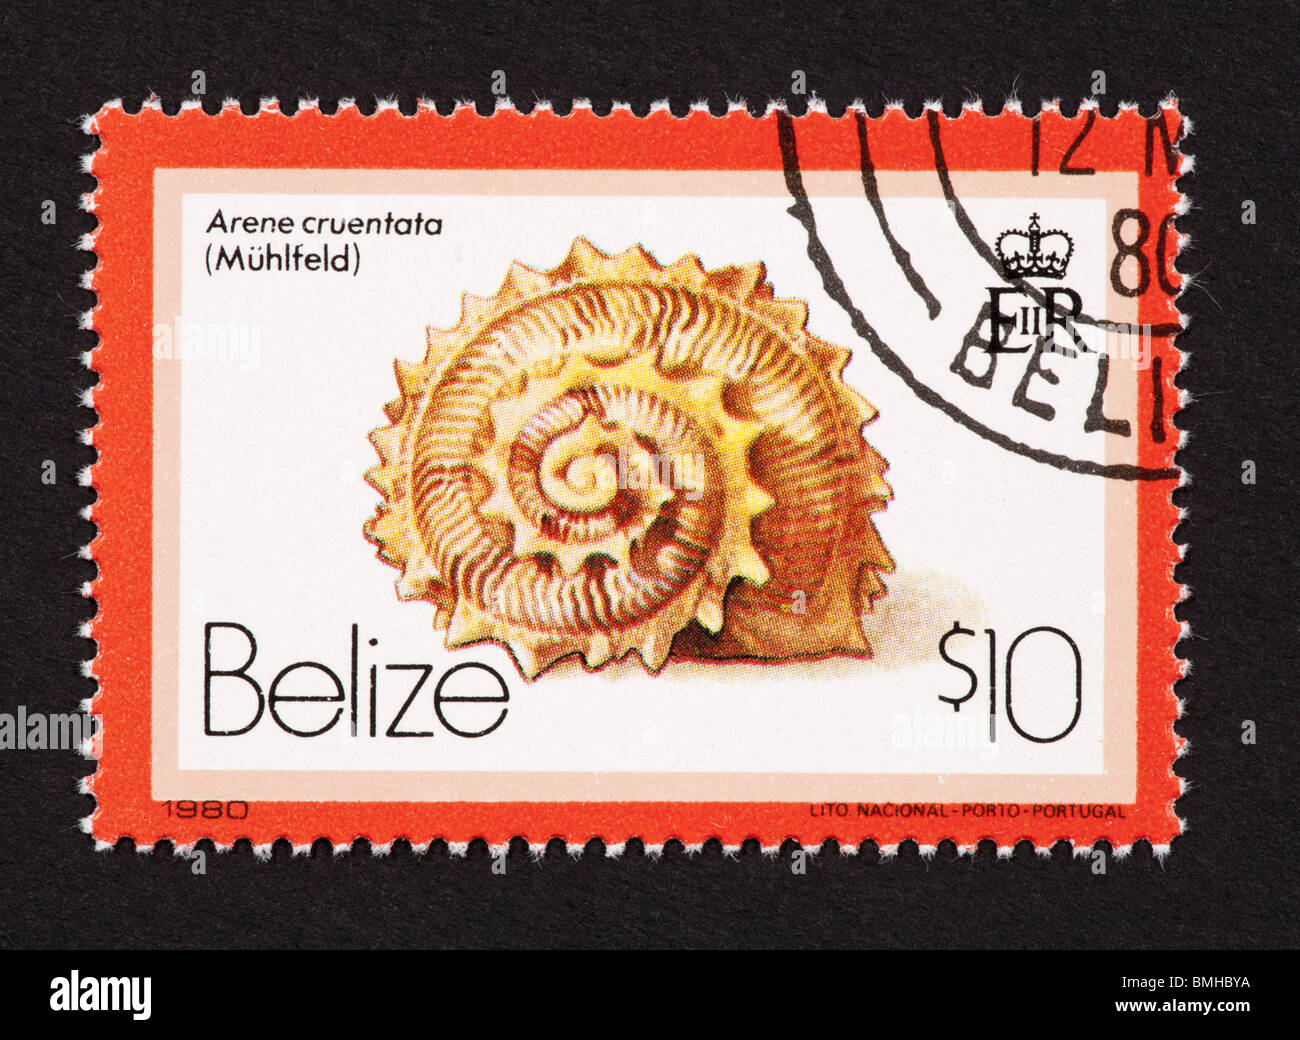 Postage stamp from Belize depicting a seashell (Arene cruentata) Stock Photo